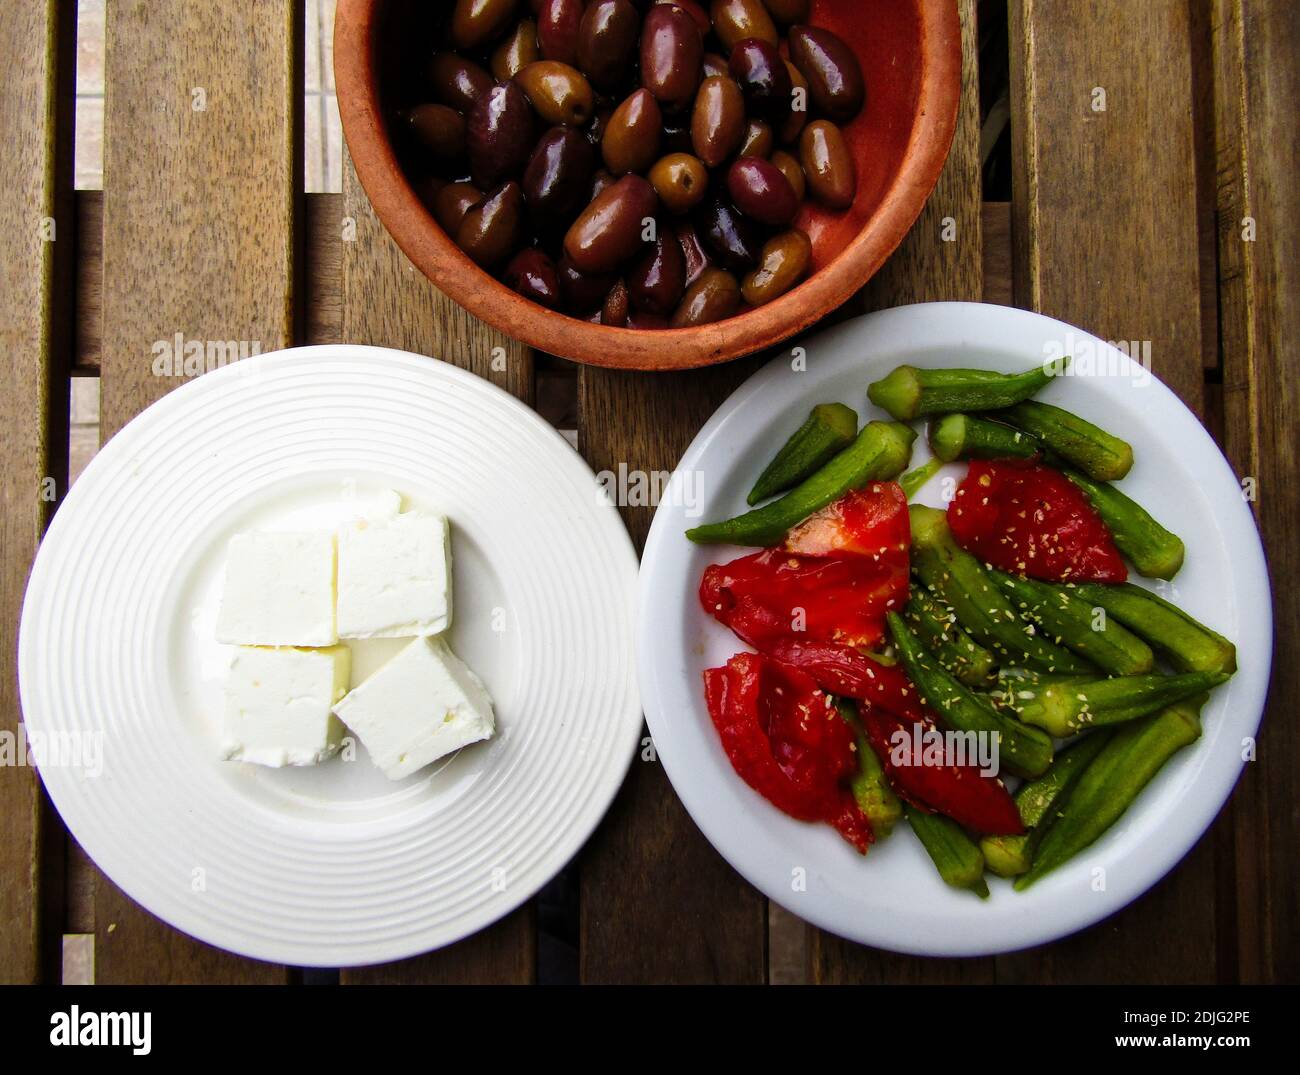 Greek Cuisine. Plates of Olives, Feta Cheese, Okra and Roasted Red Bell Peppers Stock Photo